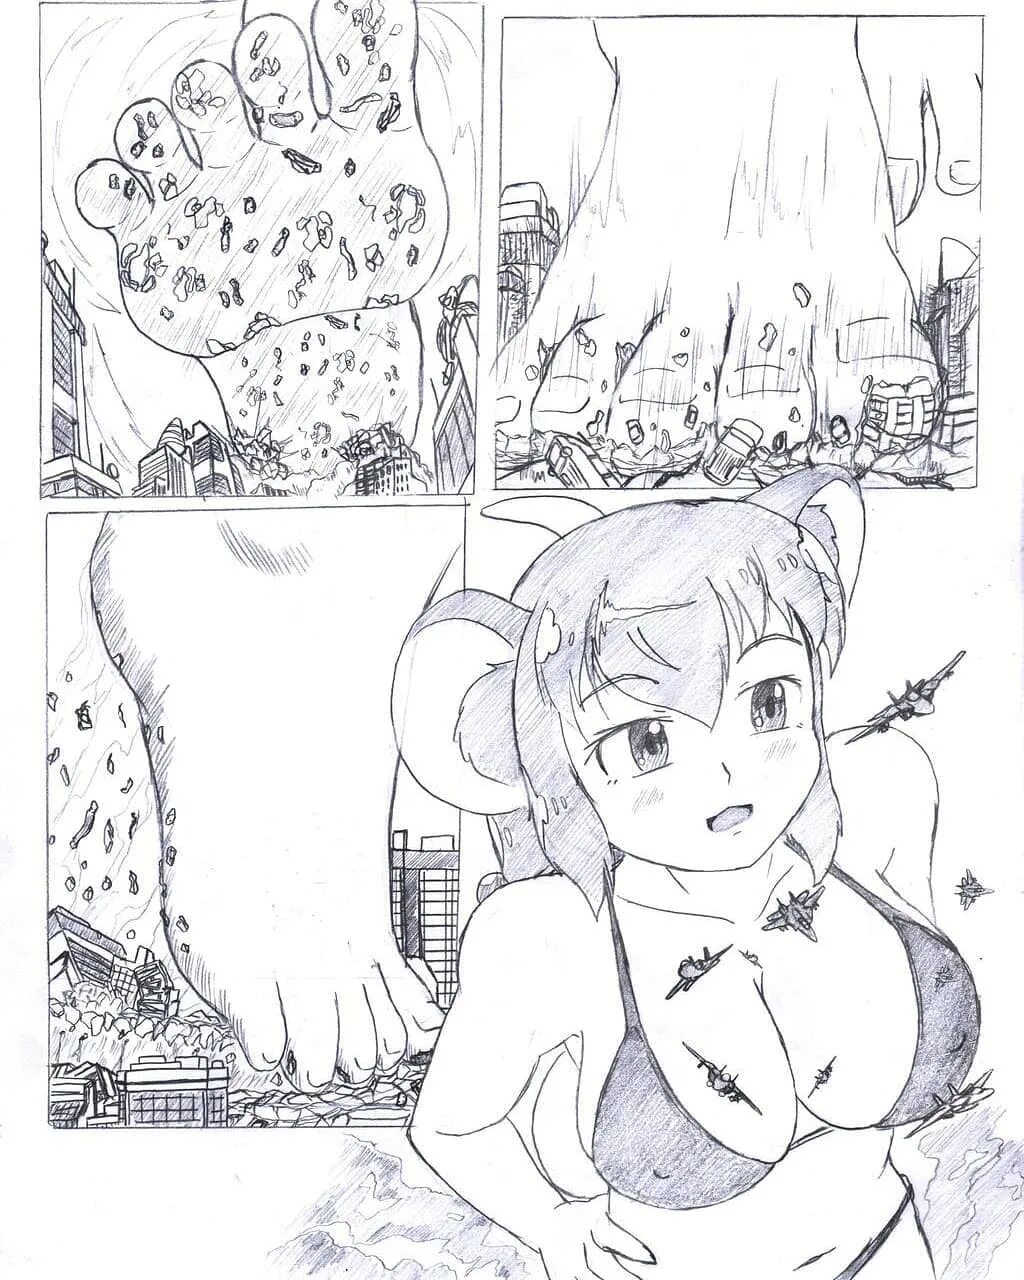 ...Page 26 to 30 Anya playing with some jets. #traditionalart #sketch #sket...